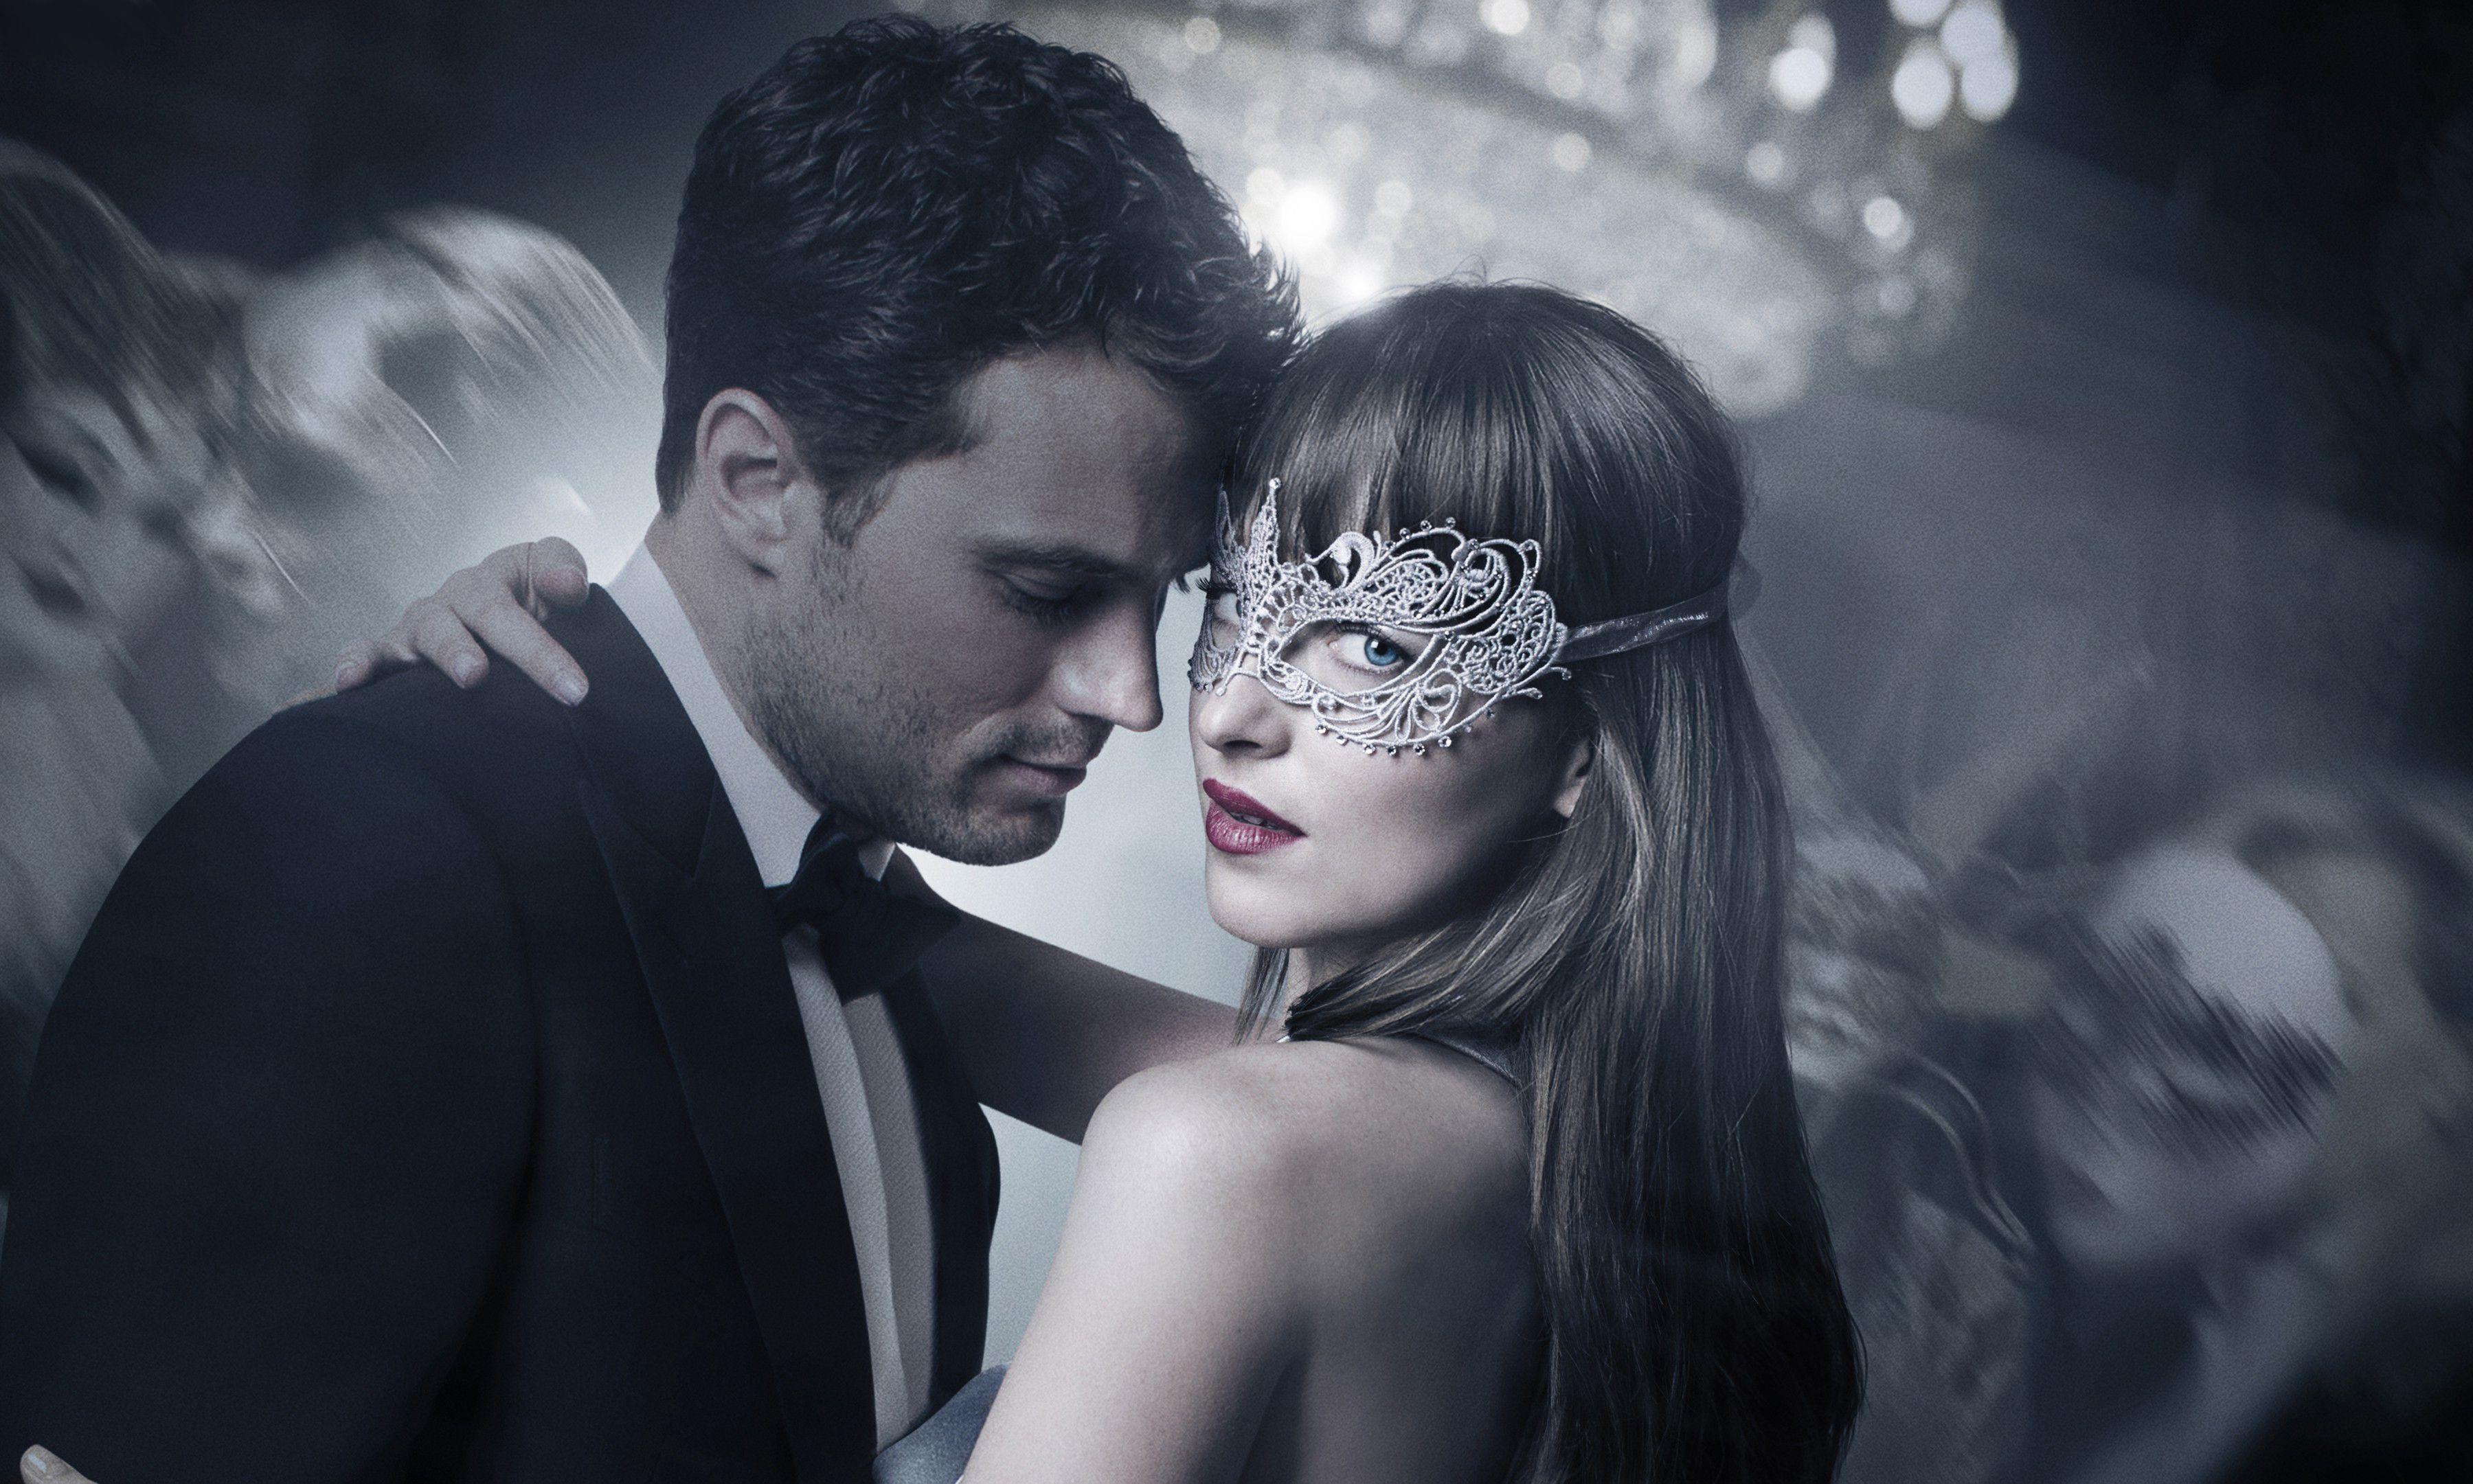 fifty shades of grey free movie download android